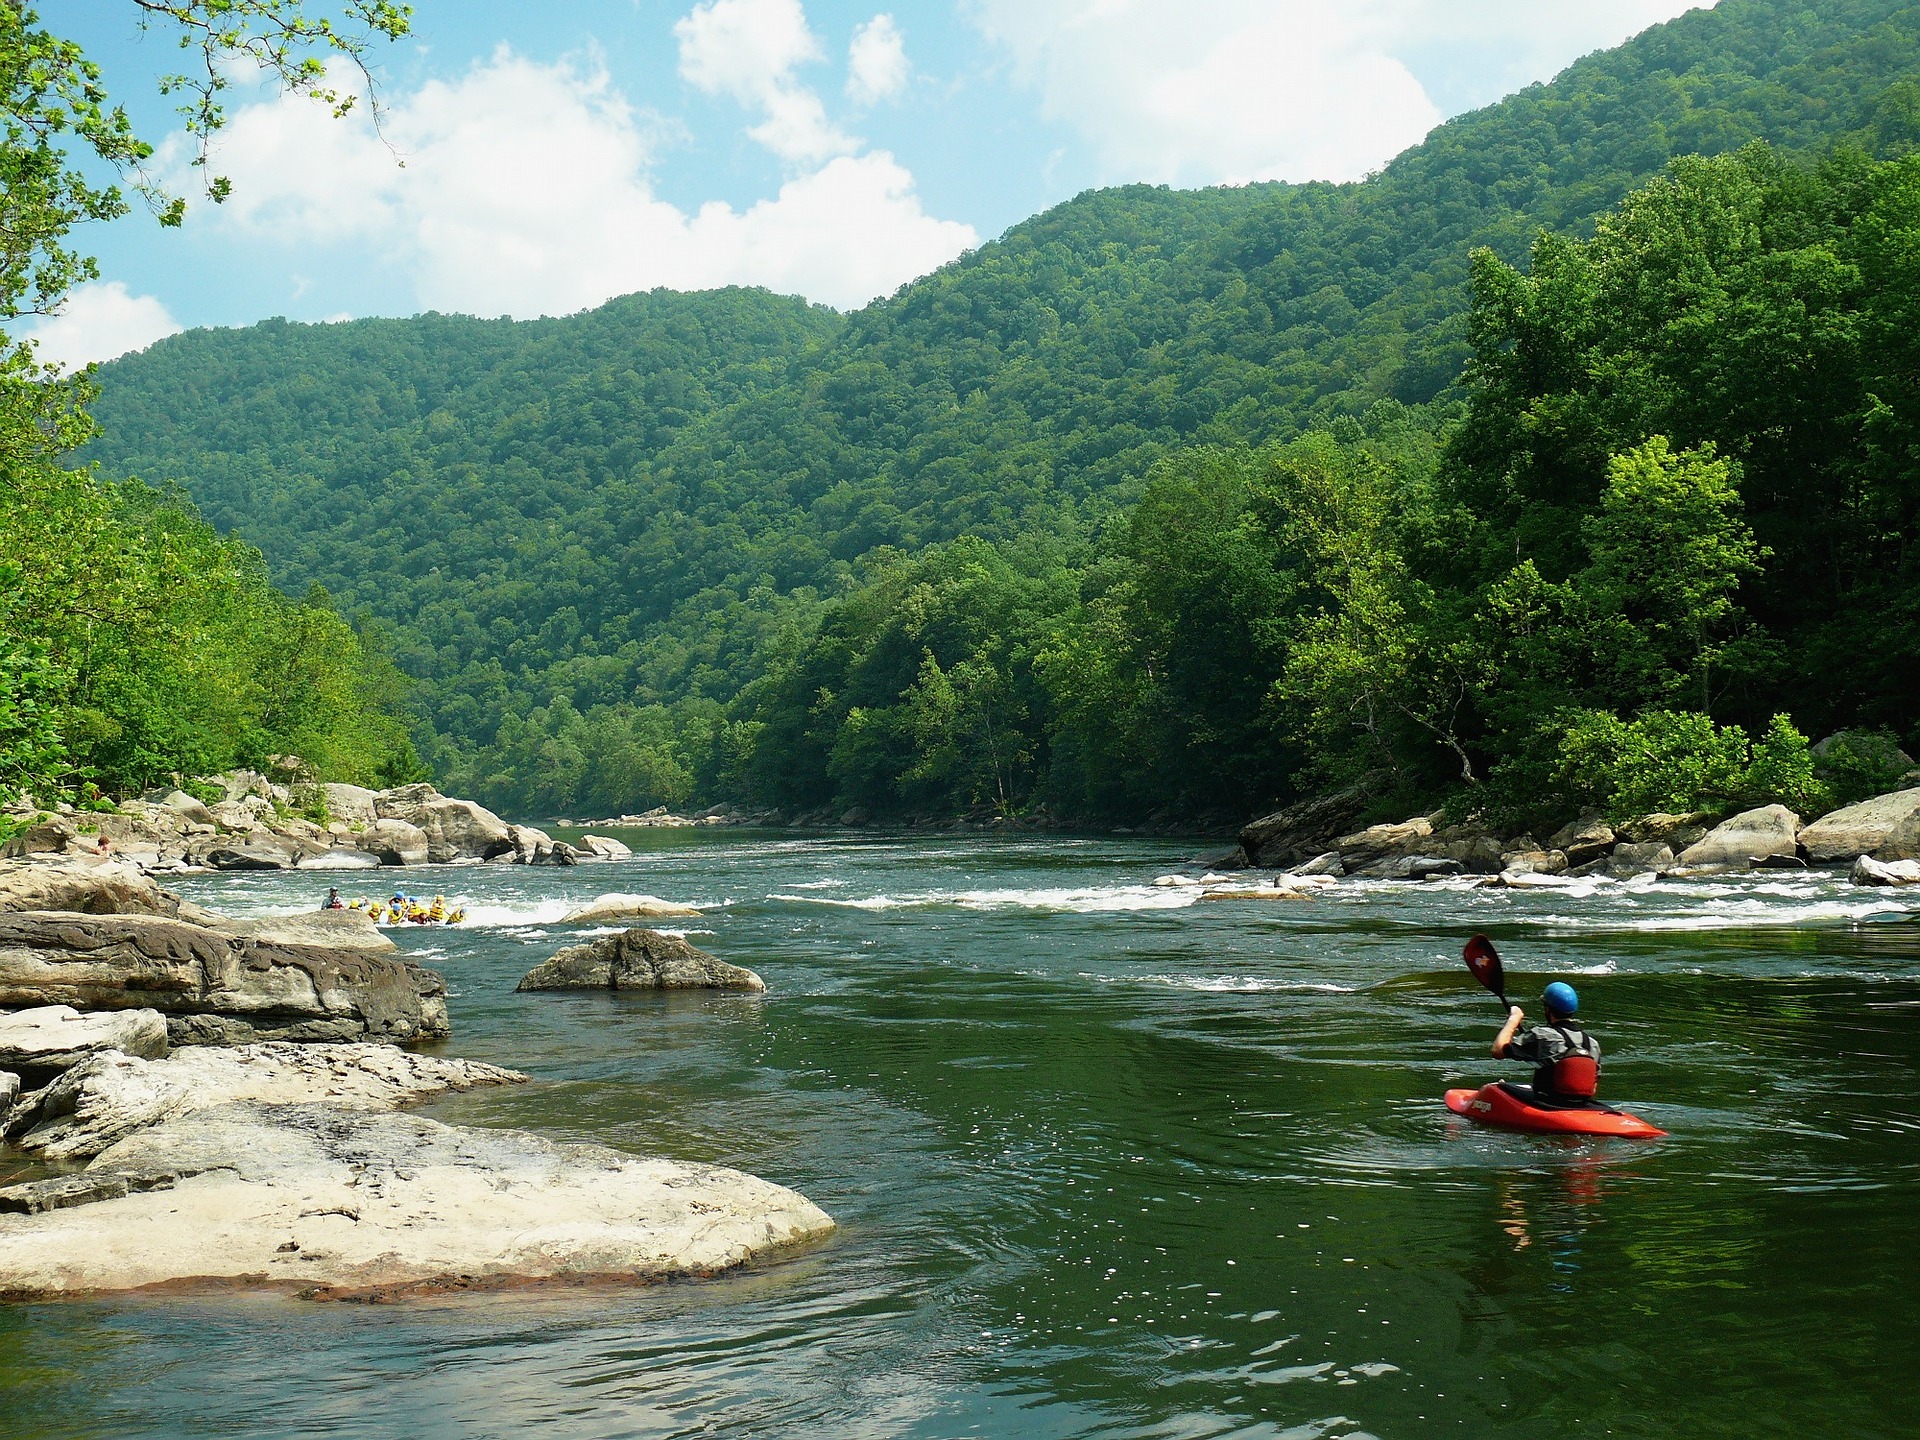 Person kayaking in river surrounded by mountains